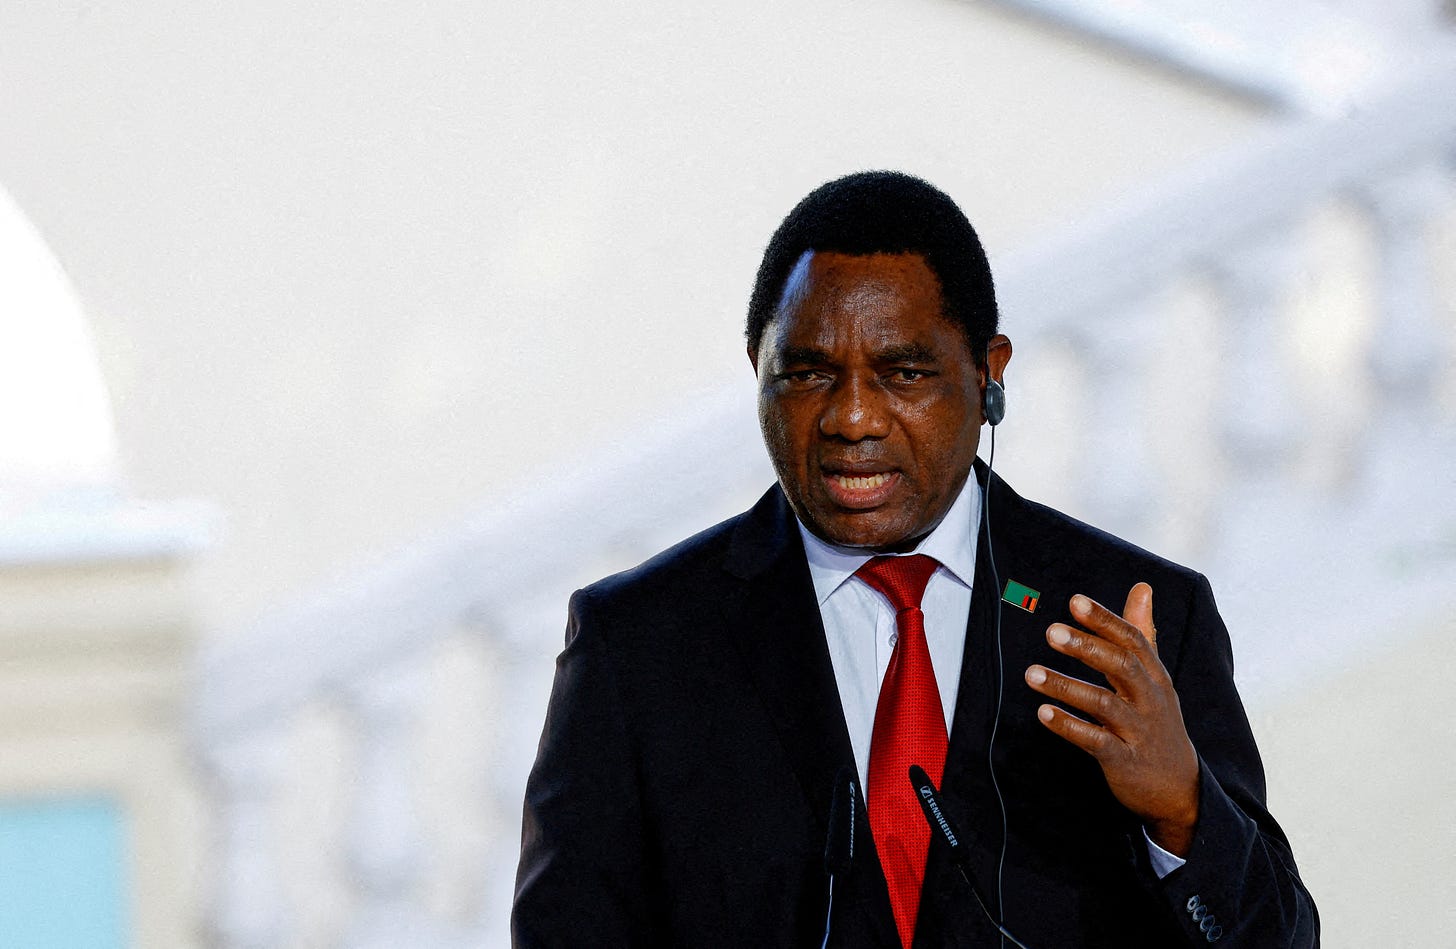 Zambia's President Hichilema speaks at a press conference